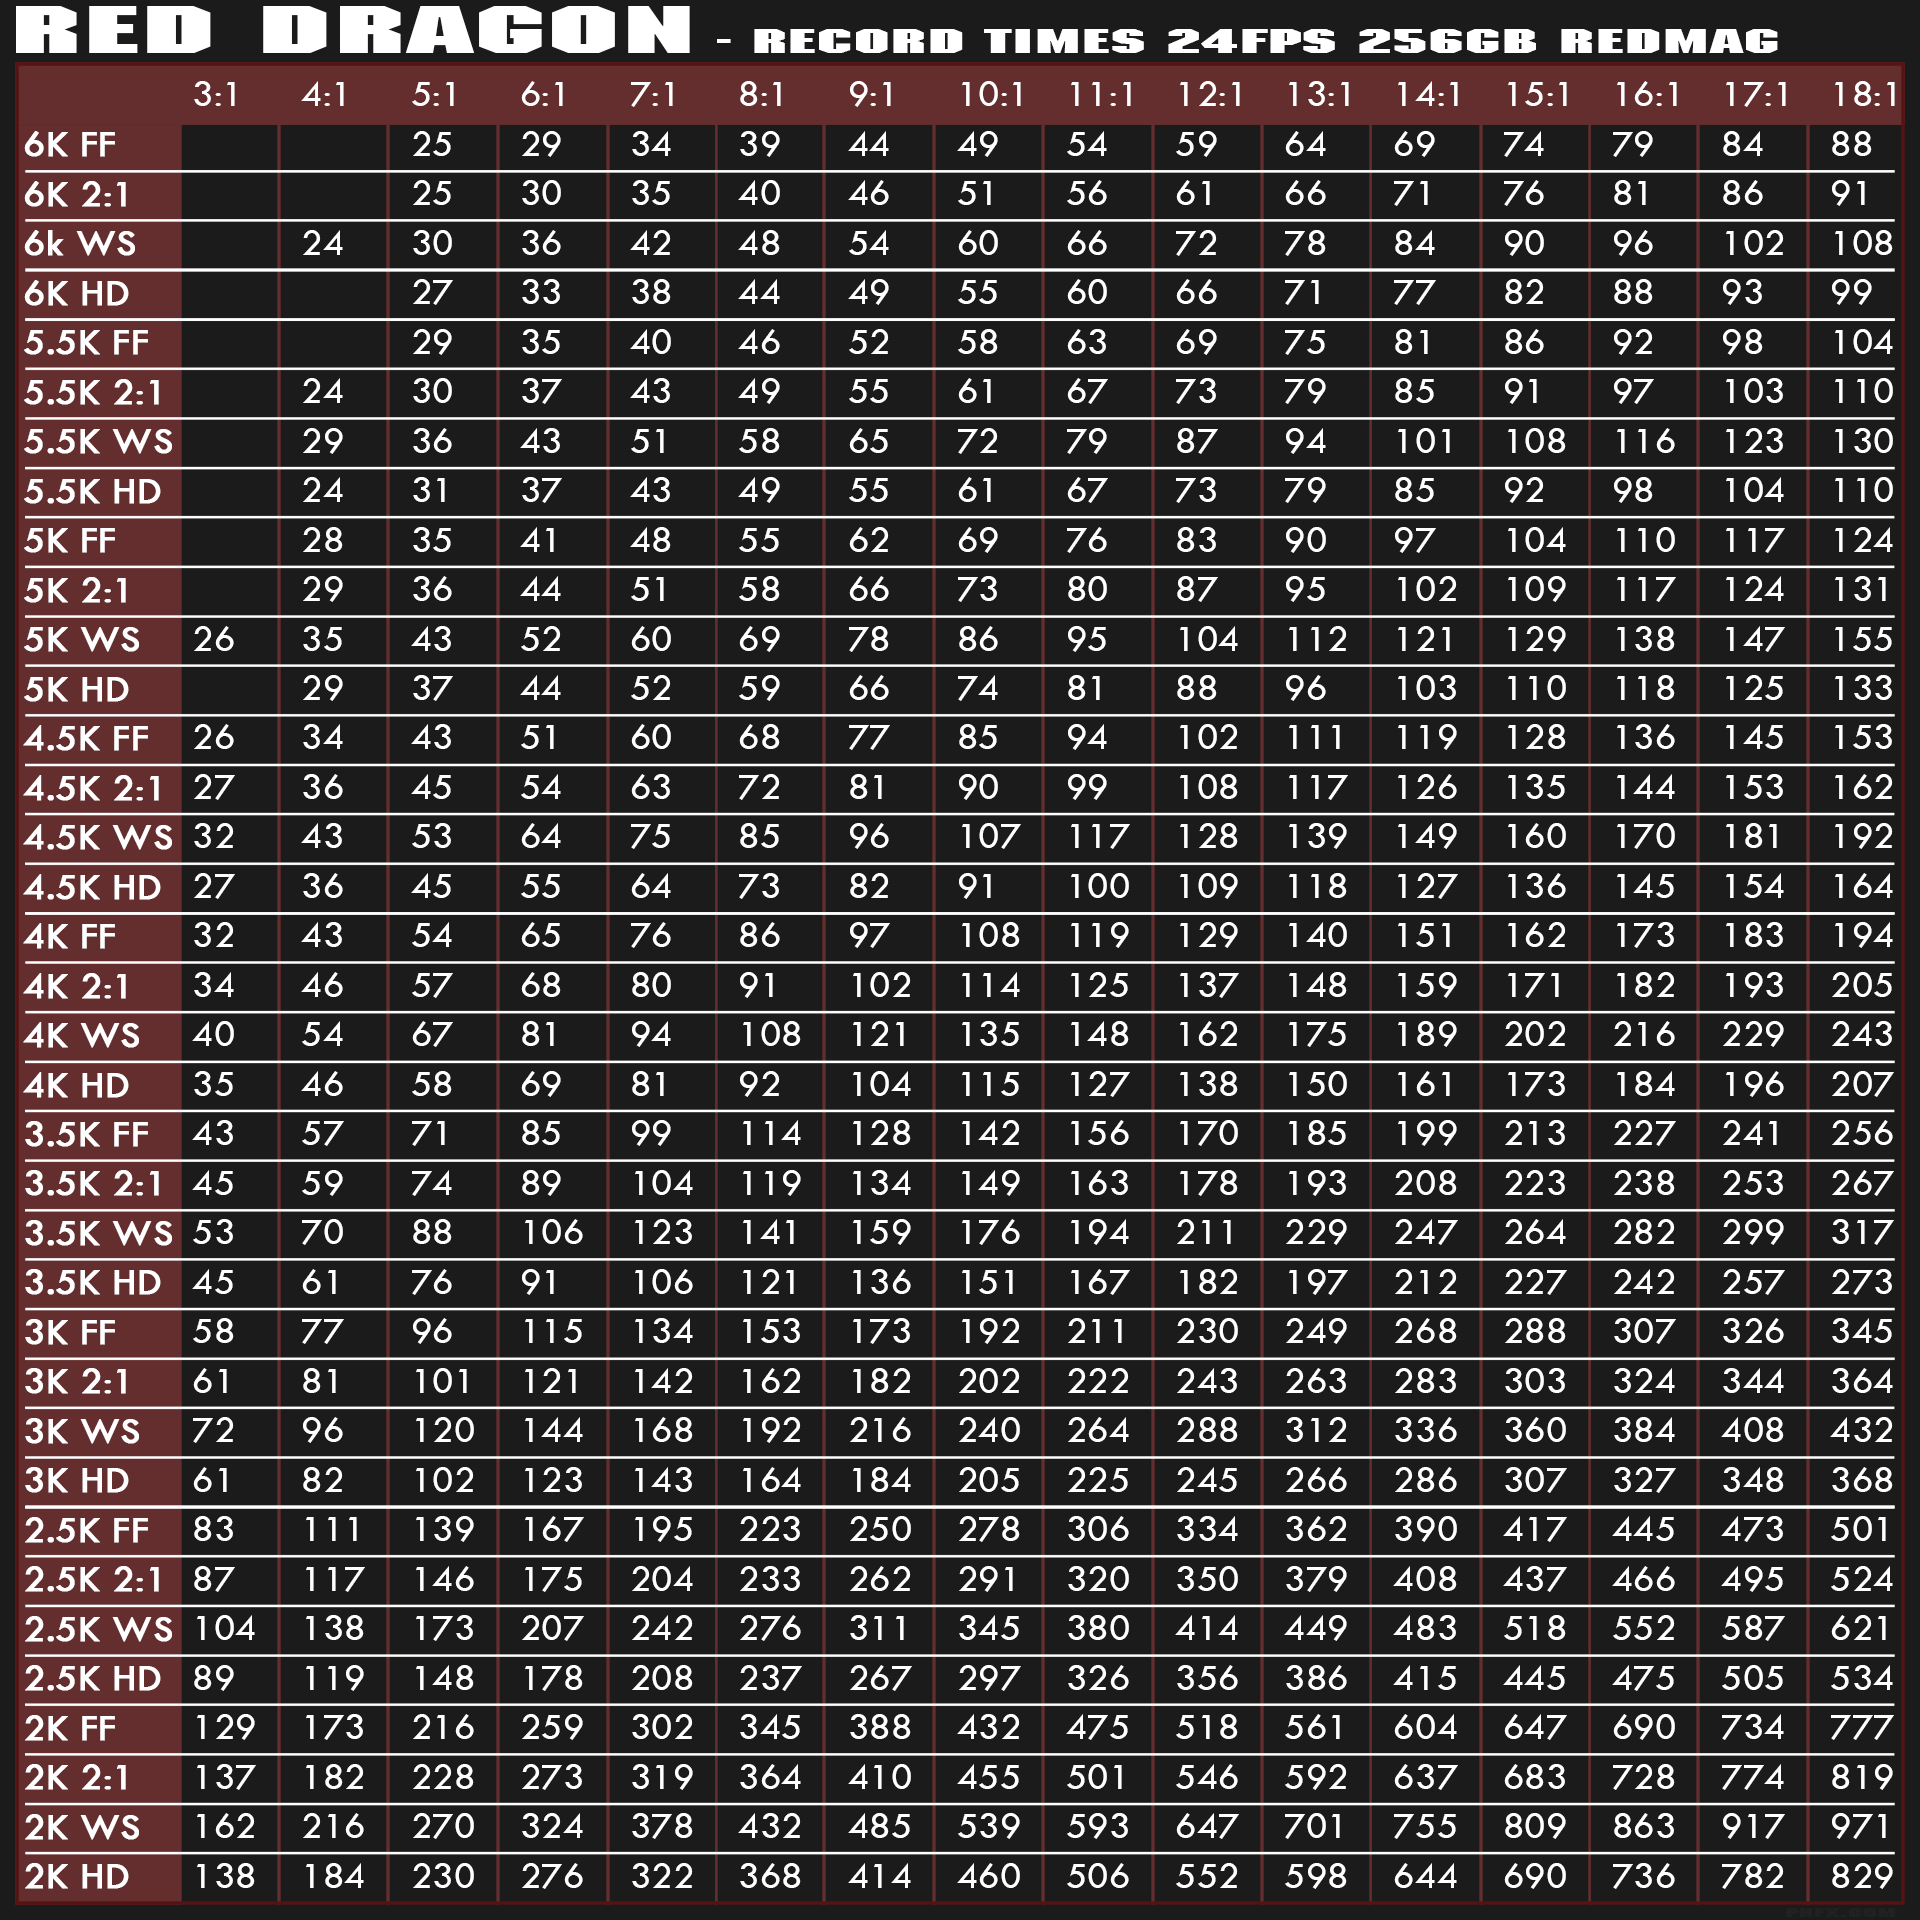 RED Dragon Record Times